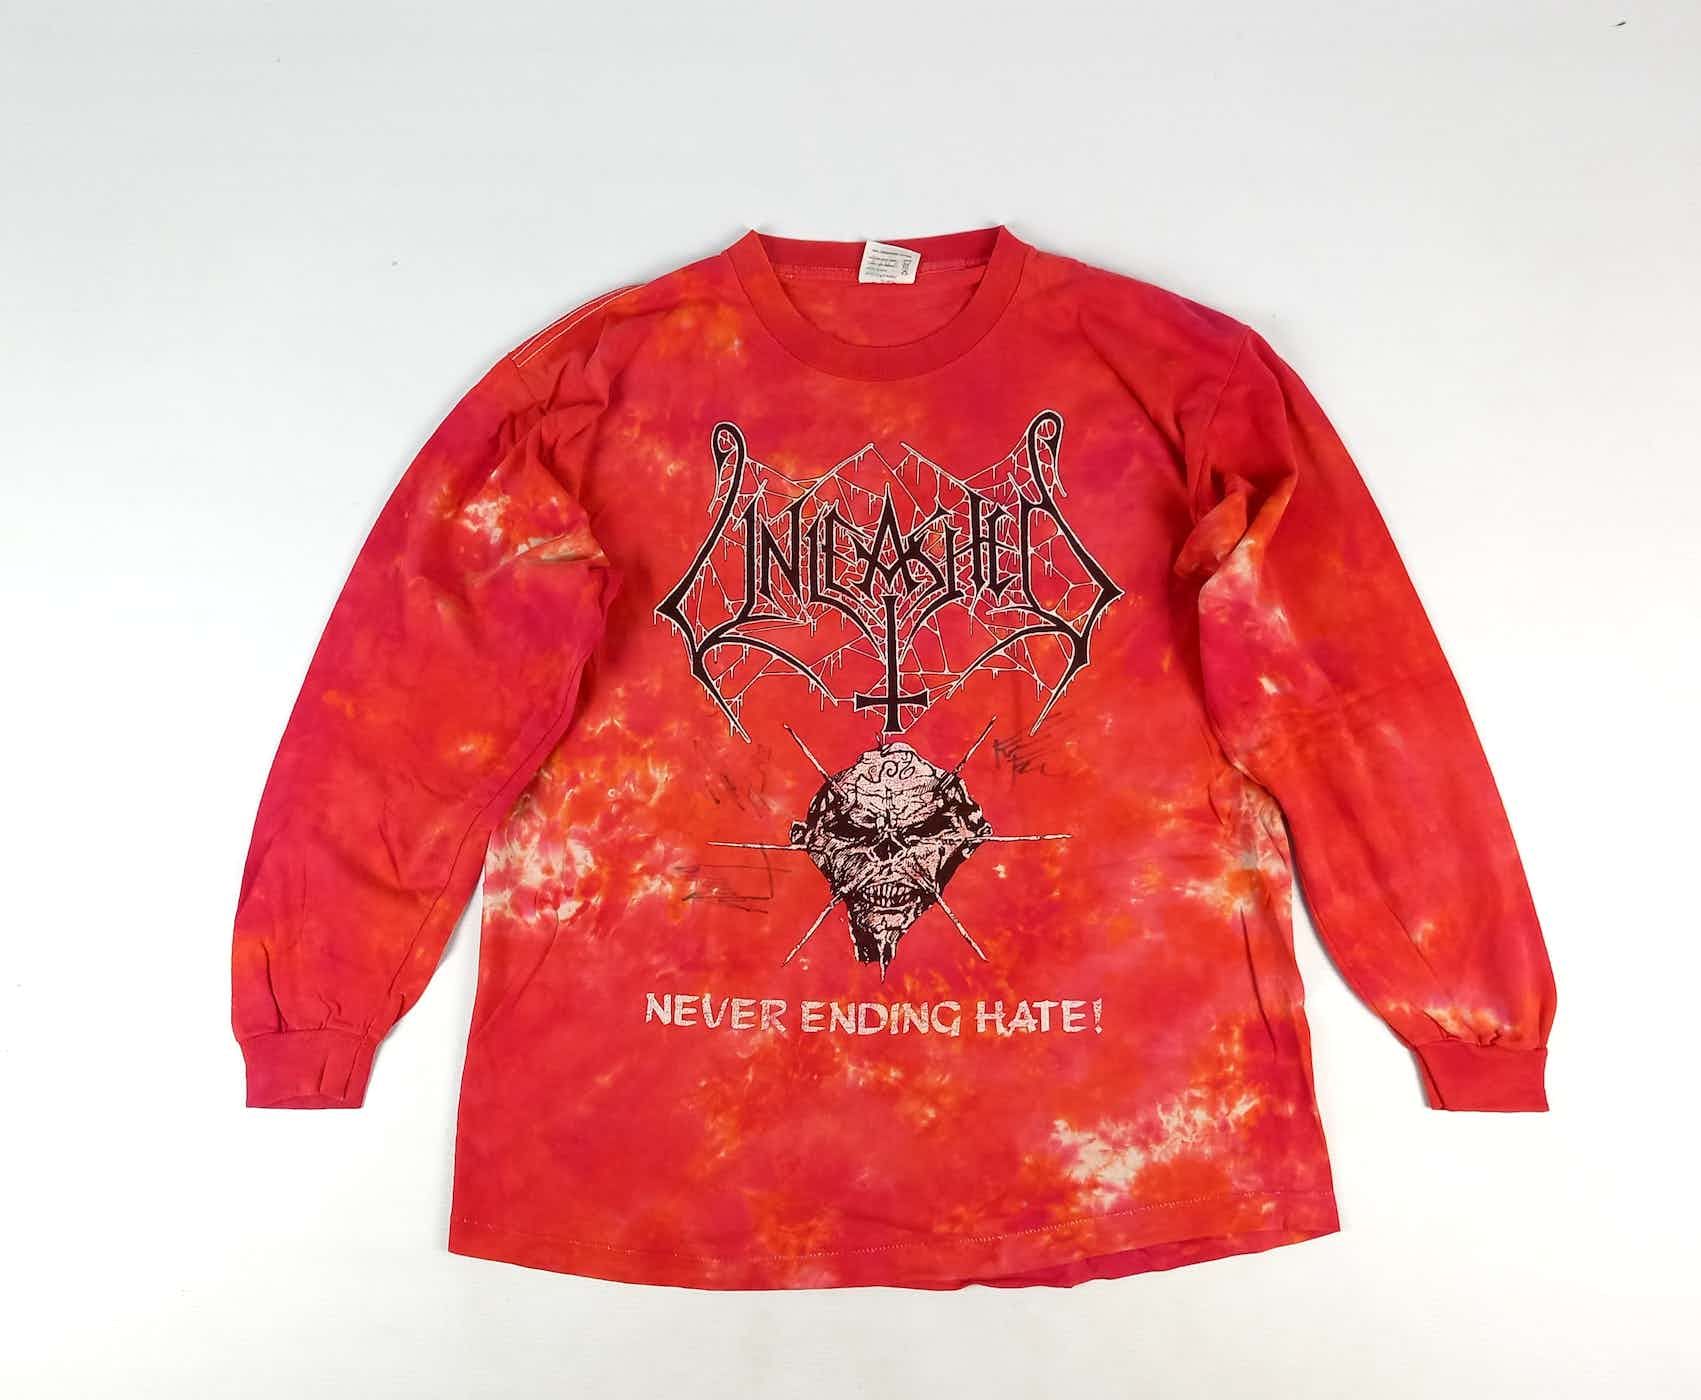 Pre-owned Band Tees X Rock Band Unleashed Autographed Vintage Longsleeve Tshirt 1993 In Tie Dye